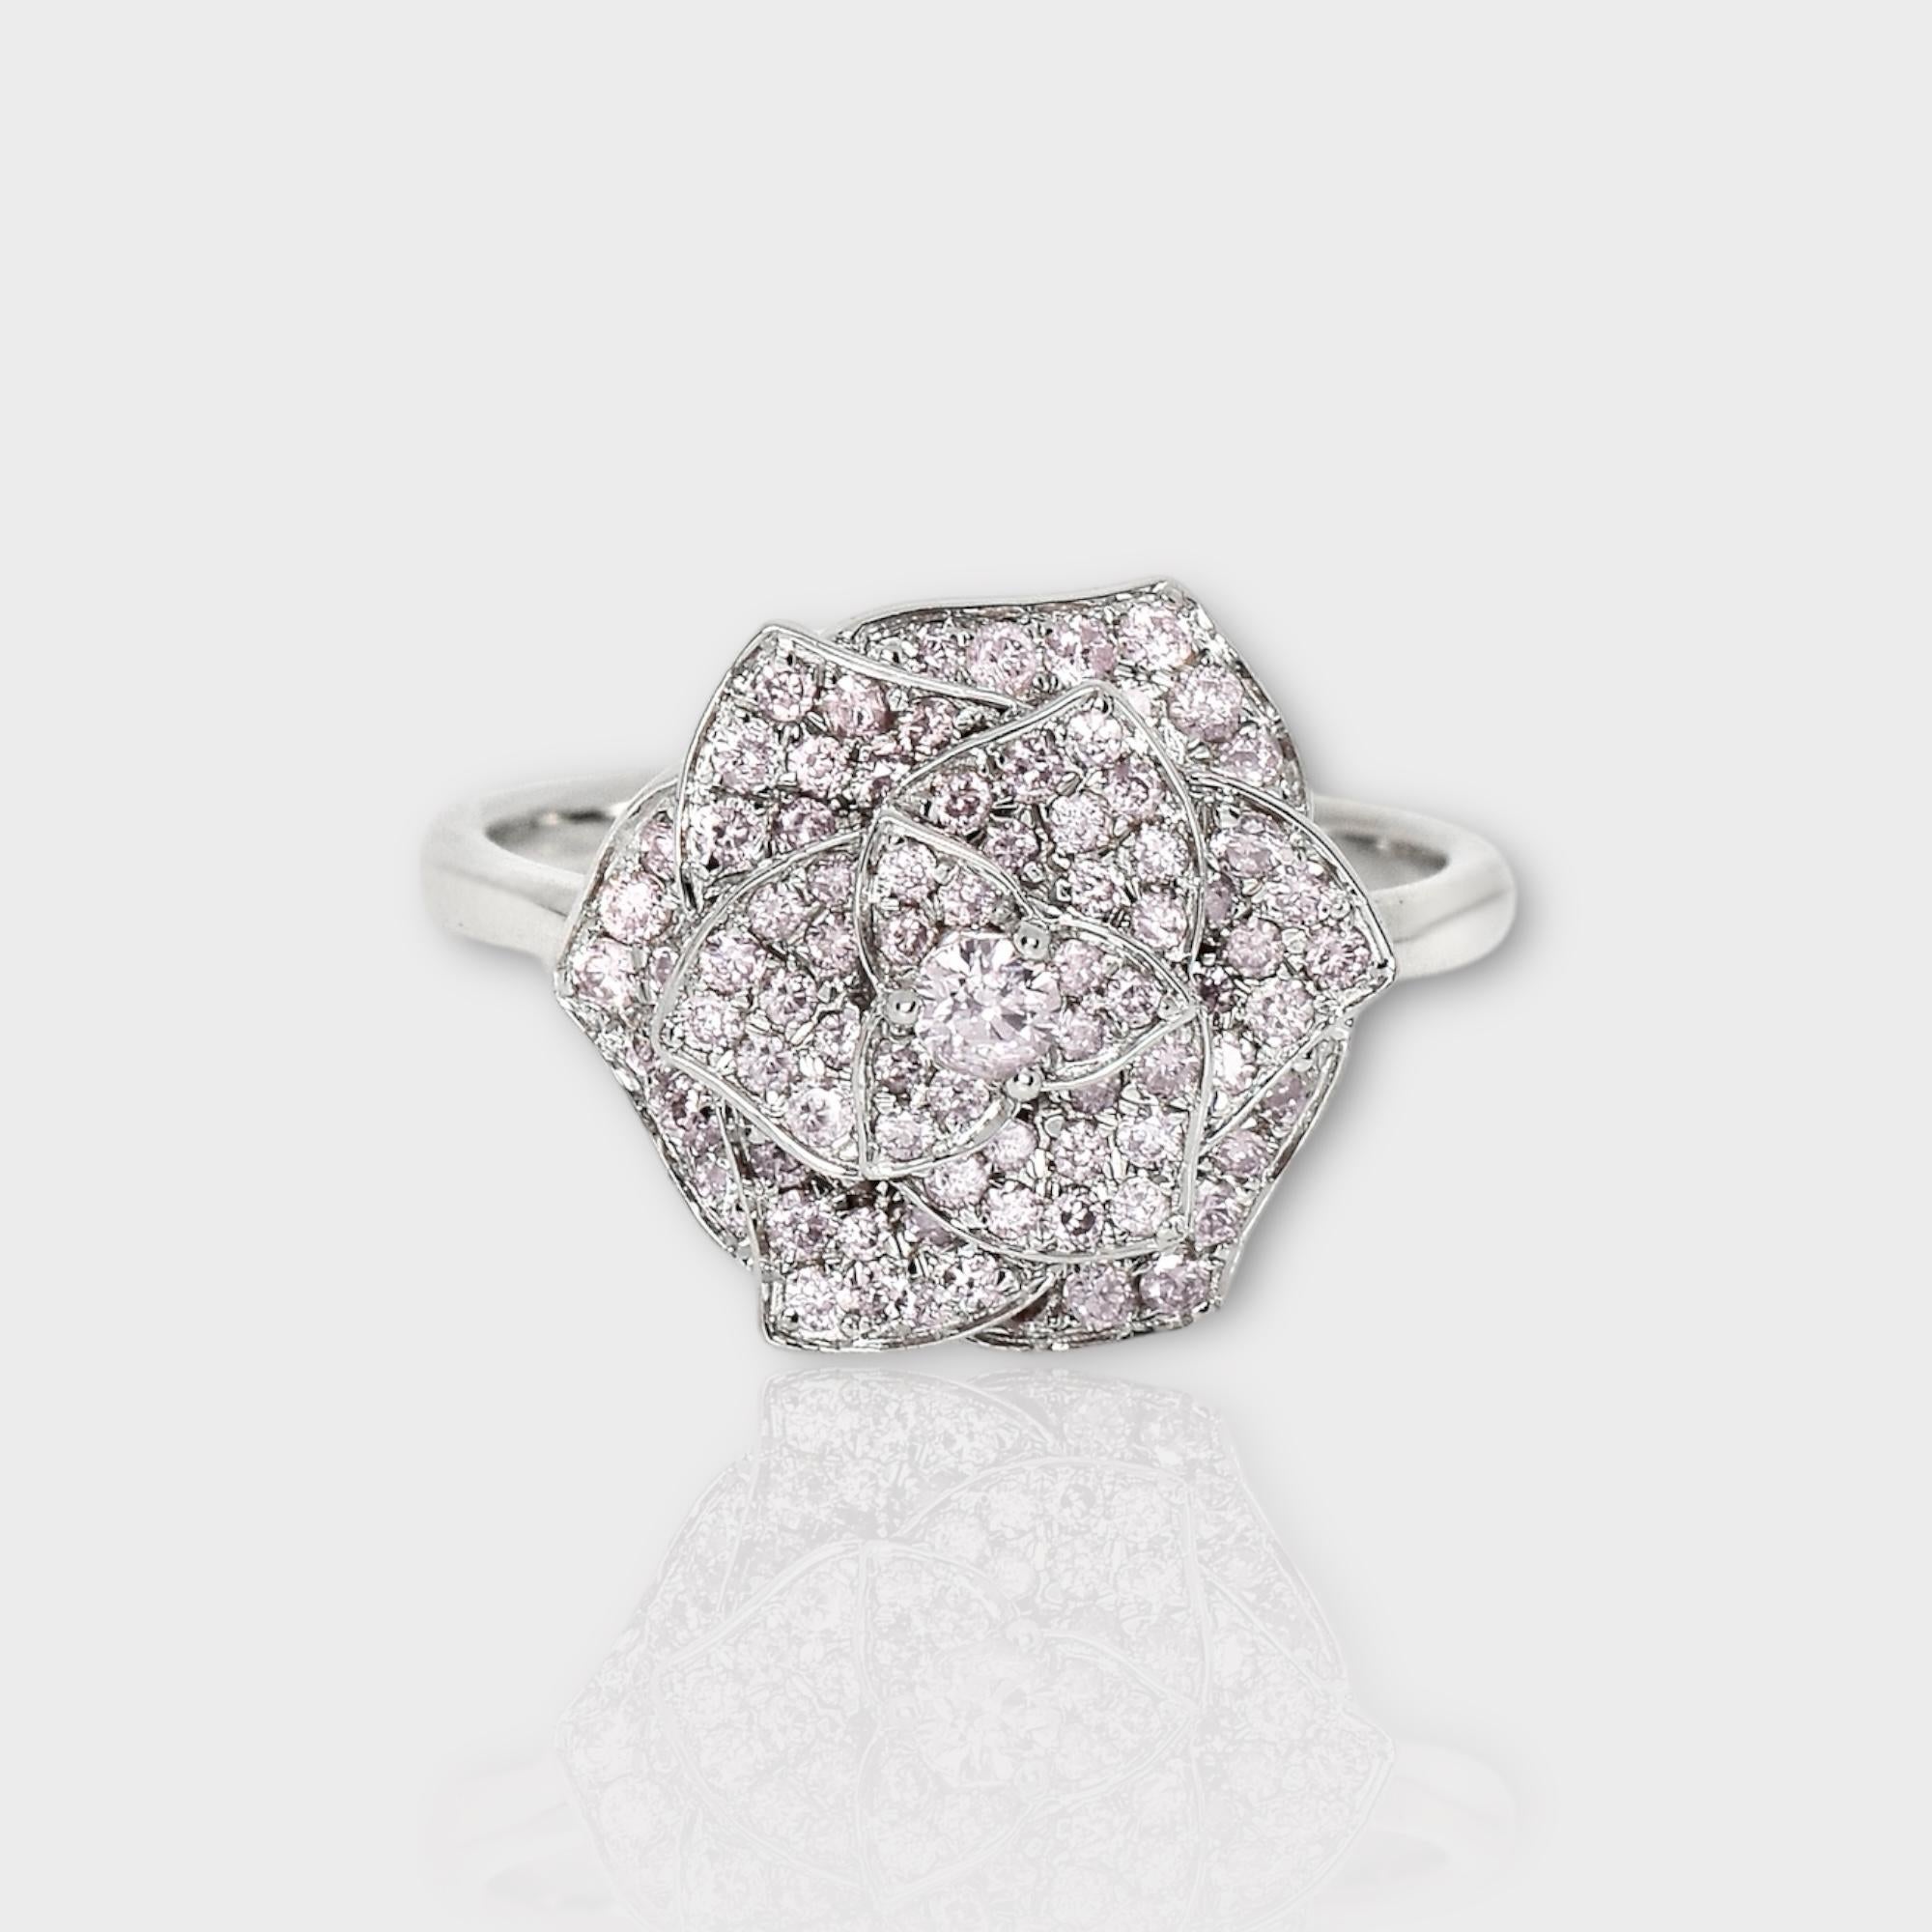 *IGI 14K 0.62 ct Natural Pink Diamonds Rose Design  Antique Art Deco Ring*

This band features a stunning design with a rose crafted from 14K white gold. It is set with natural pink diamonds weighing 0.62 carats.

This necklace features colorful